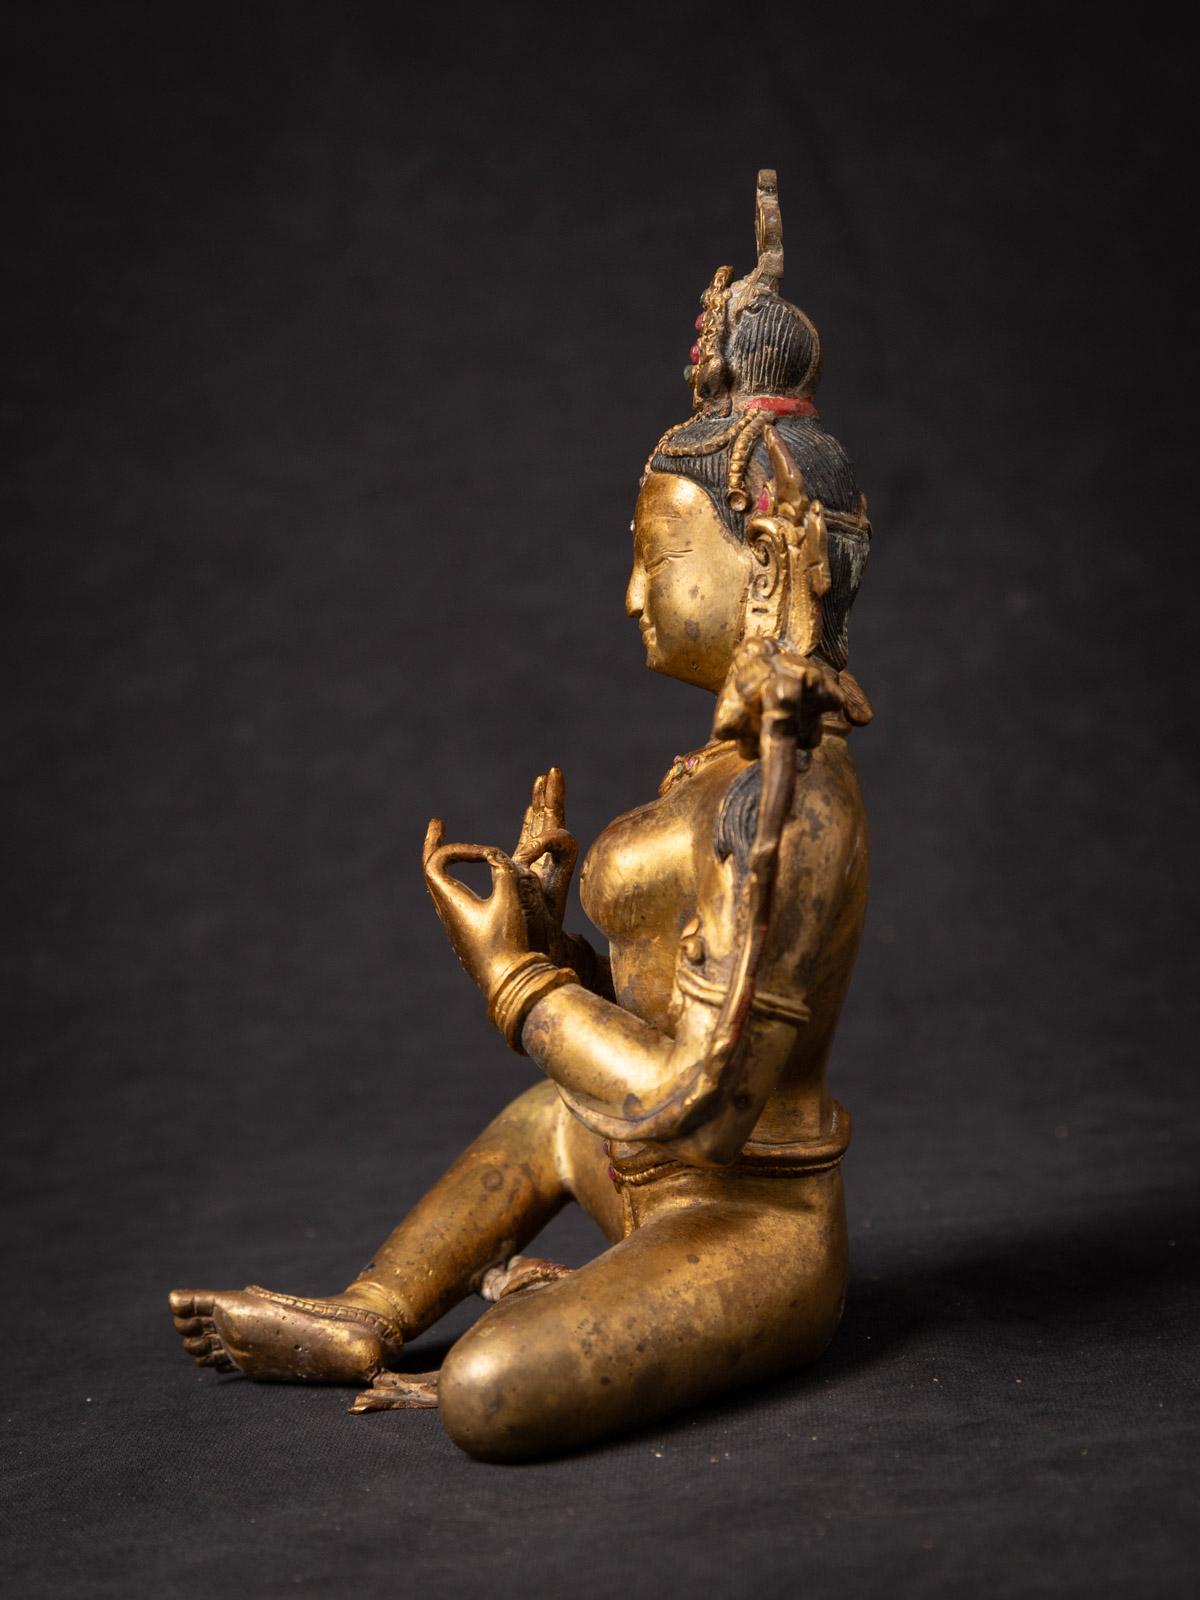 Old bronze Nepali Green Tara statue
Material : bronze
20,3 cm high
14,1 cm wide and 12,2 cm deep
Fire gilded with 24 krt. gold
Dharmachakra mudra
Middle 20th century
Inlaid with real gemstones
Weight: 1,31 kgs
Originating from Nepal
Nr: 3709-29